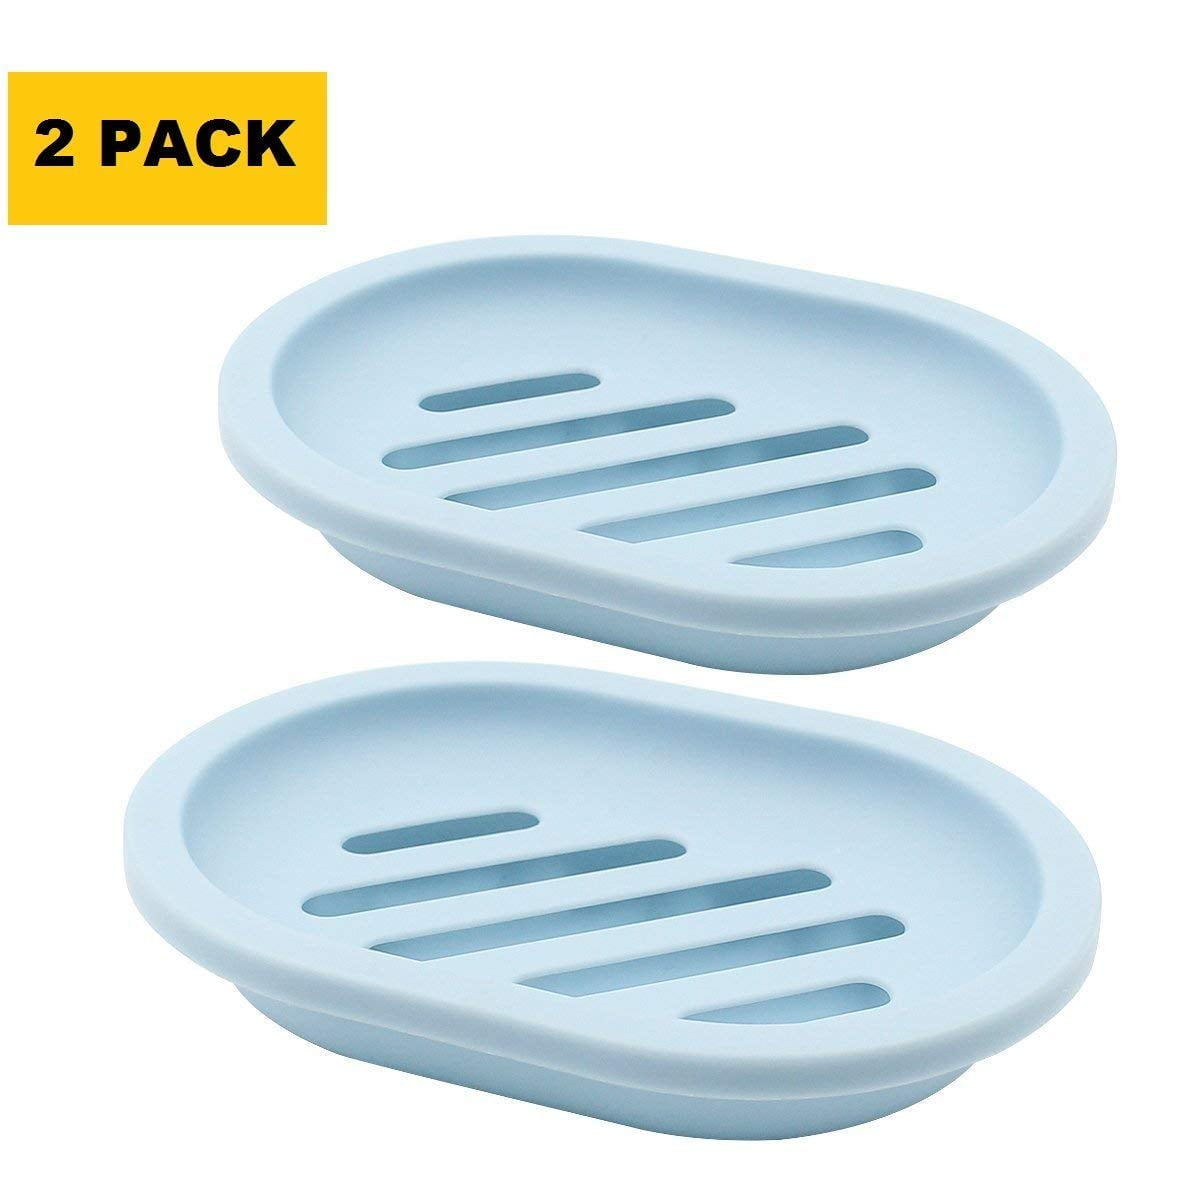 Small Pack of 2 Clear Plastic Oval Shaped idesign Soap Savers Dish / Holder 